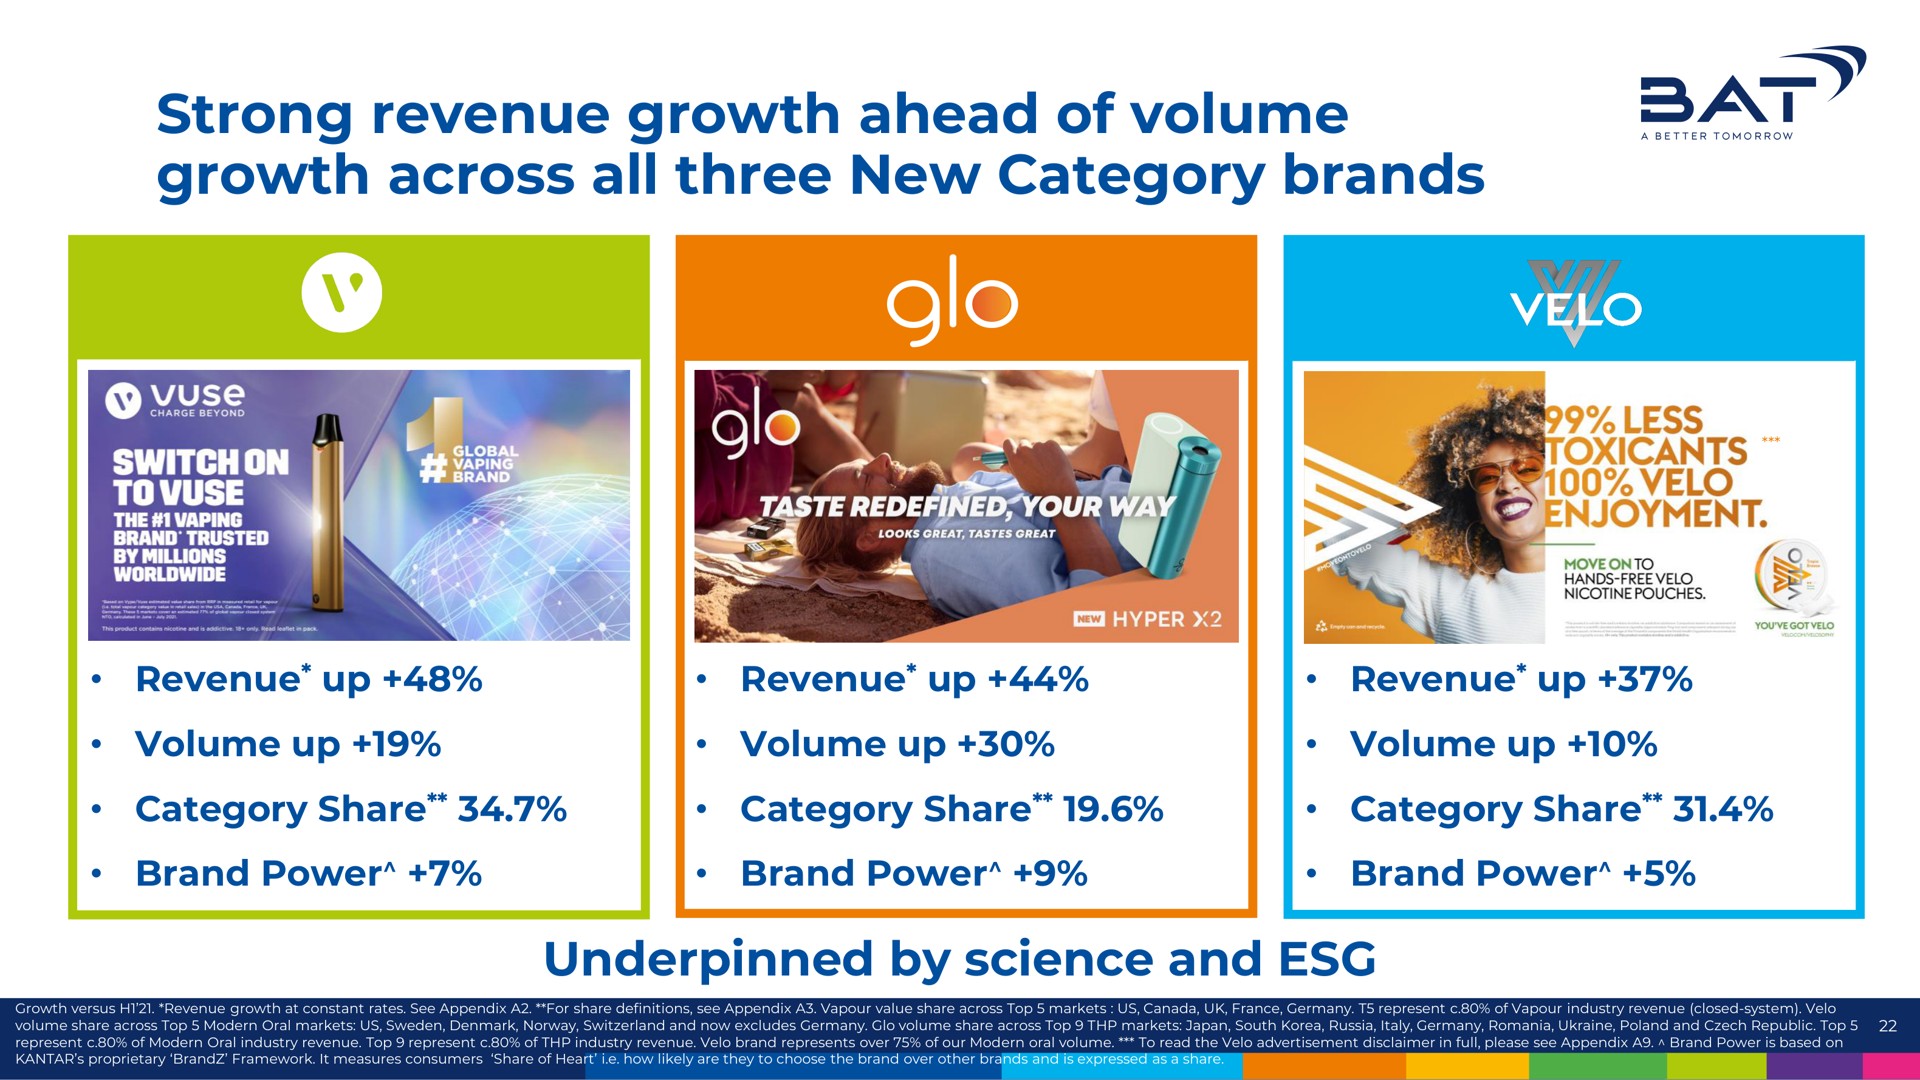 strong revenue growth ahead of volume growth across all three new category brands sat | BAT